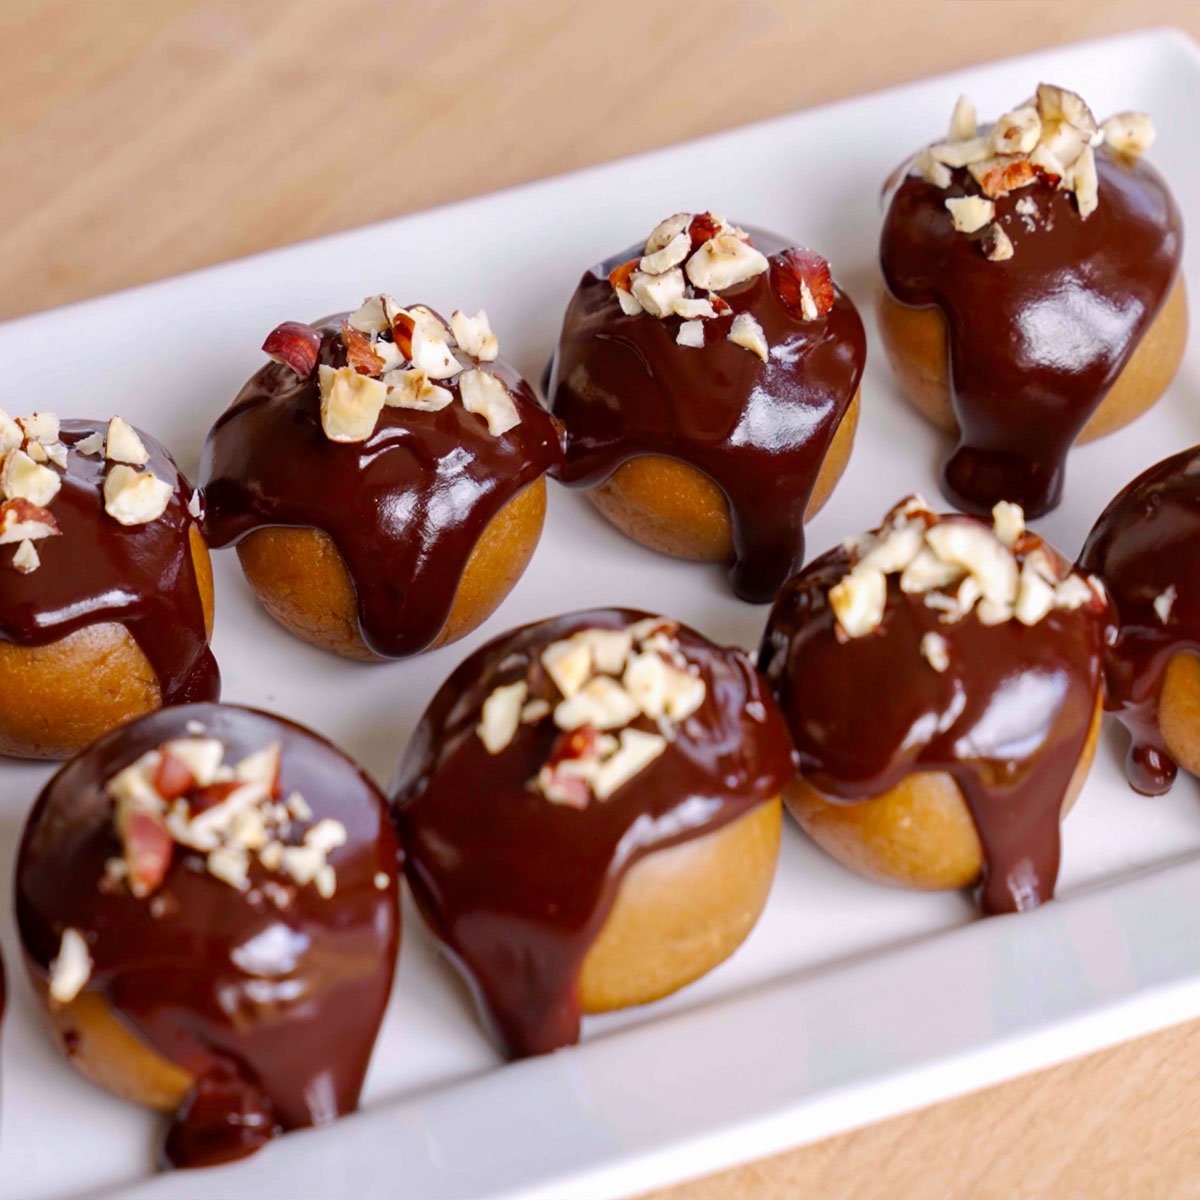 Image of Turtle Cookie Balls, cookies balls filled with Hazelnut spread or Nutella and covered with chocolate and chopped hazelnuts